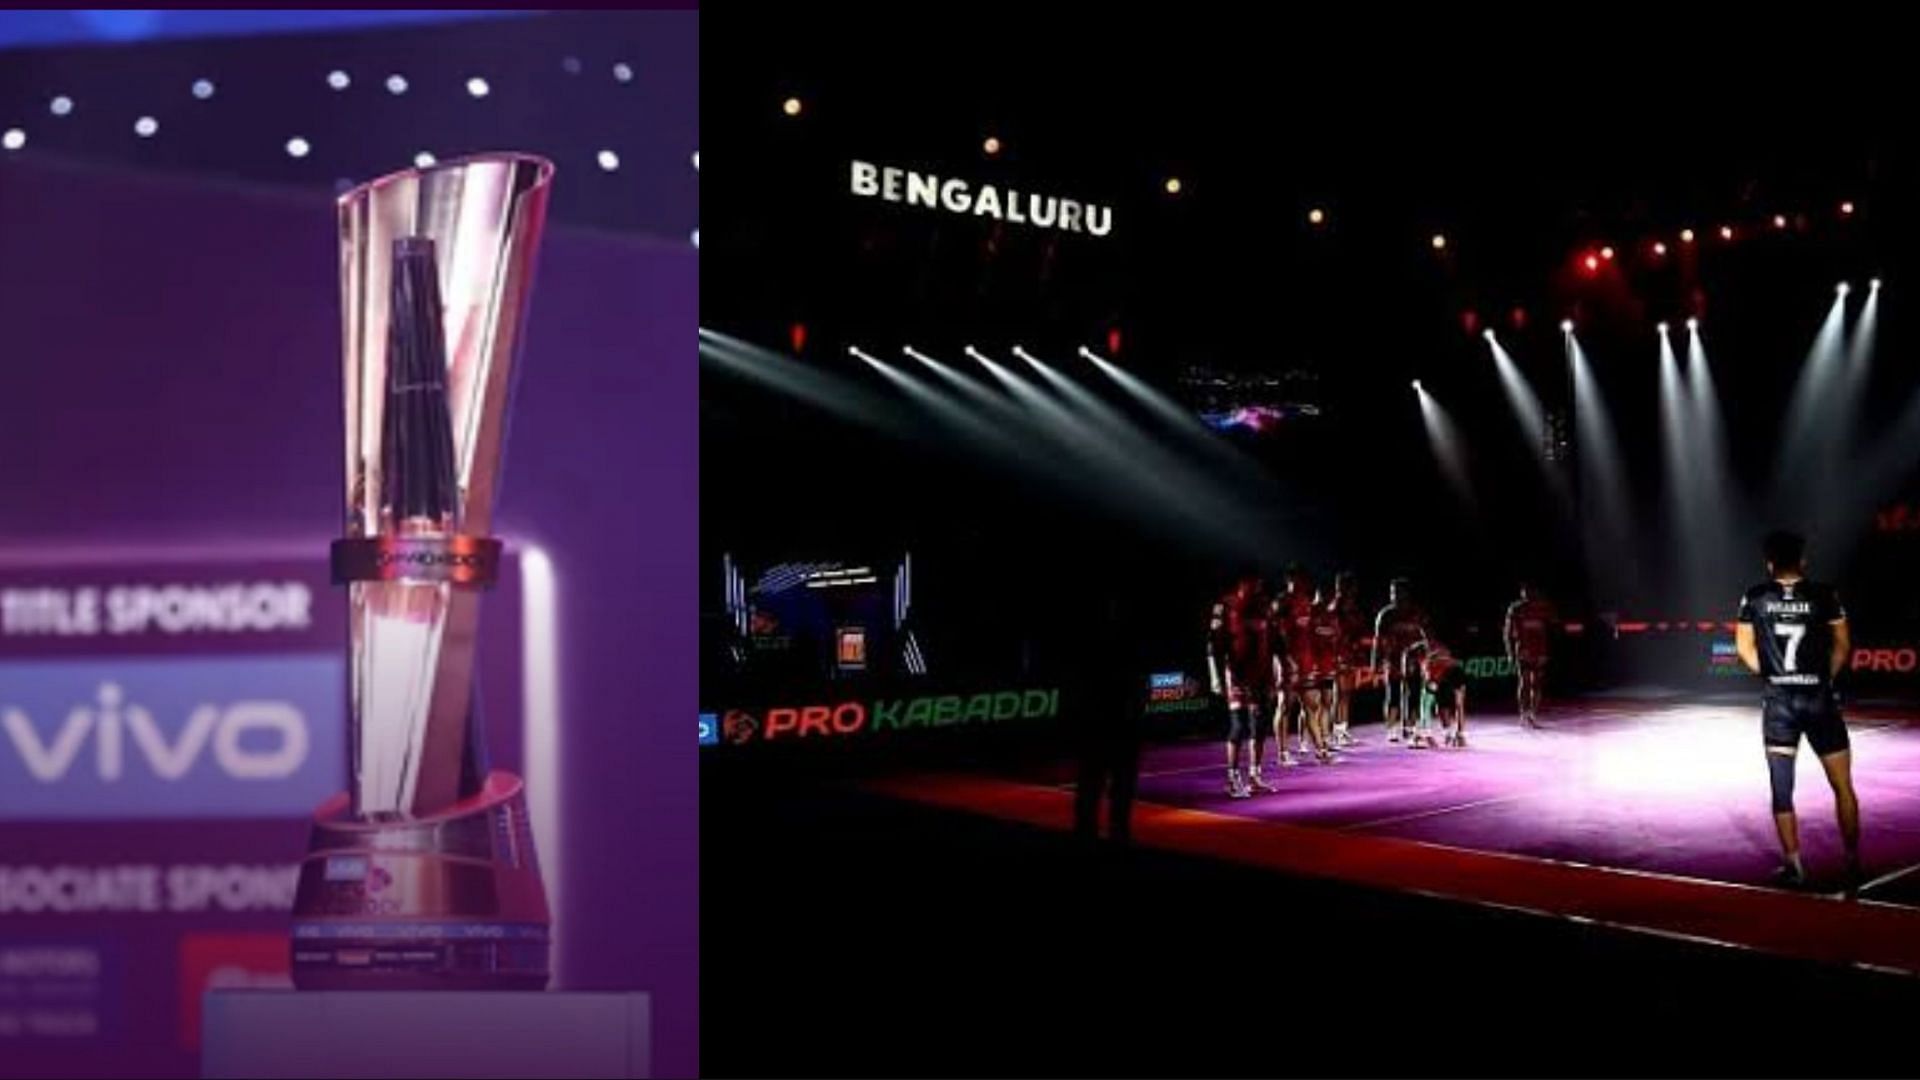 Pro Kabaddi 2021 will begin tomorrow evening in Bengaluru with three matches scheduled to happen on the first night of the tournament